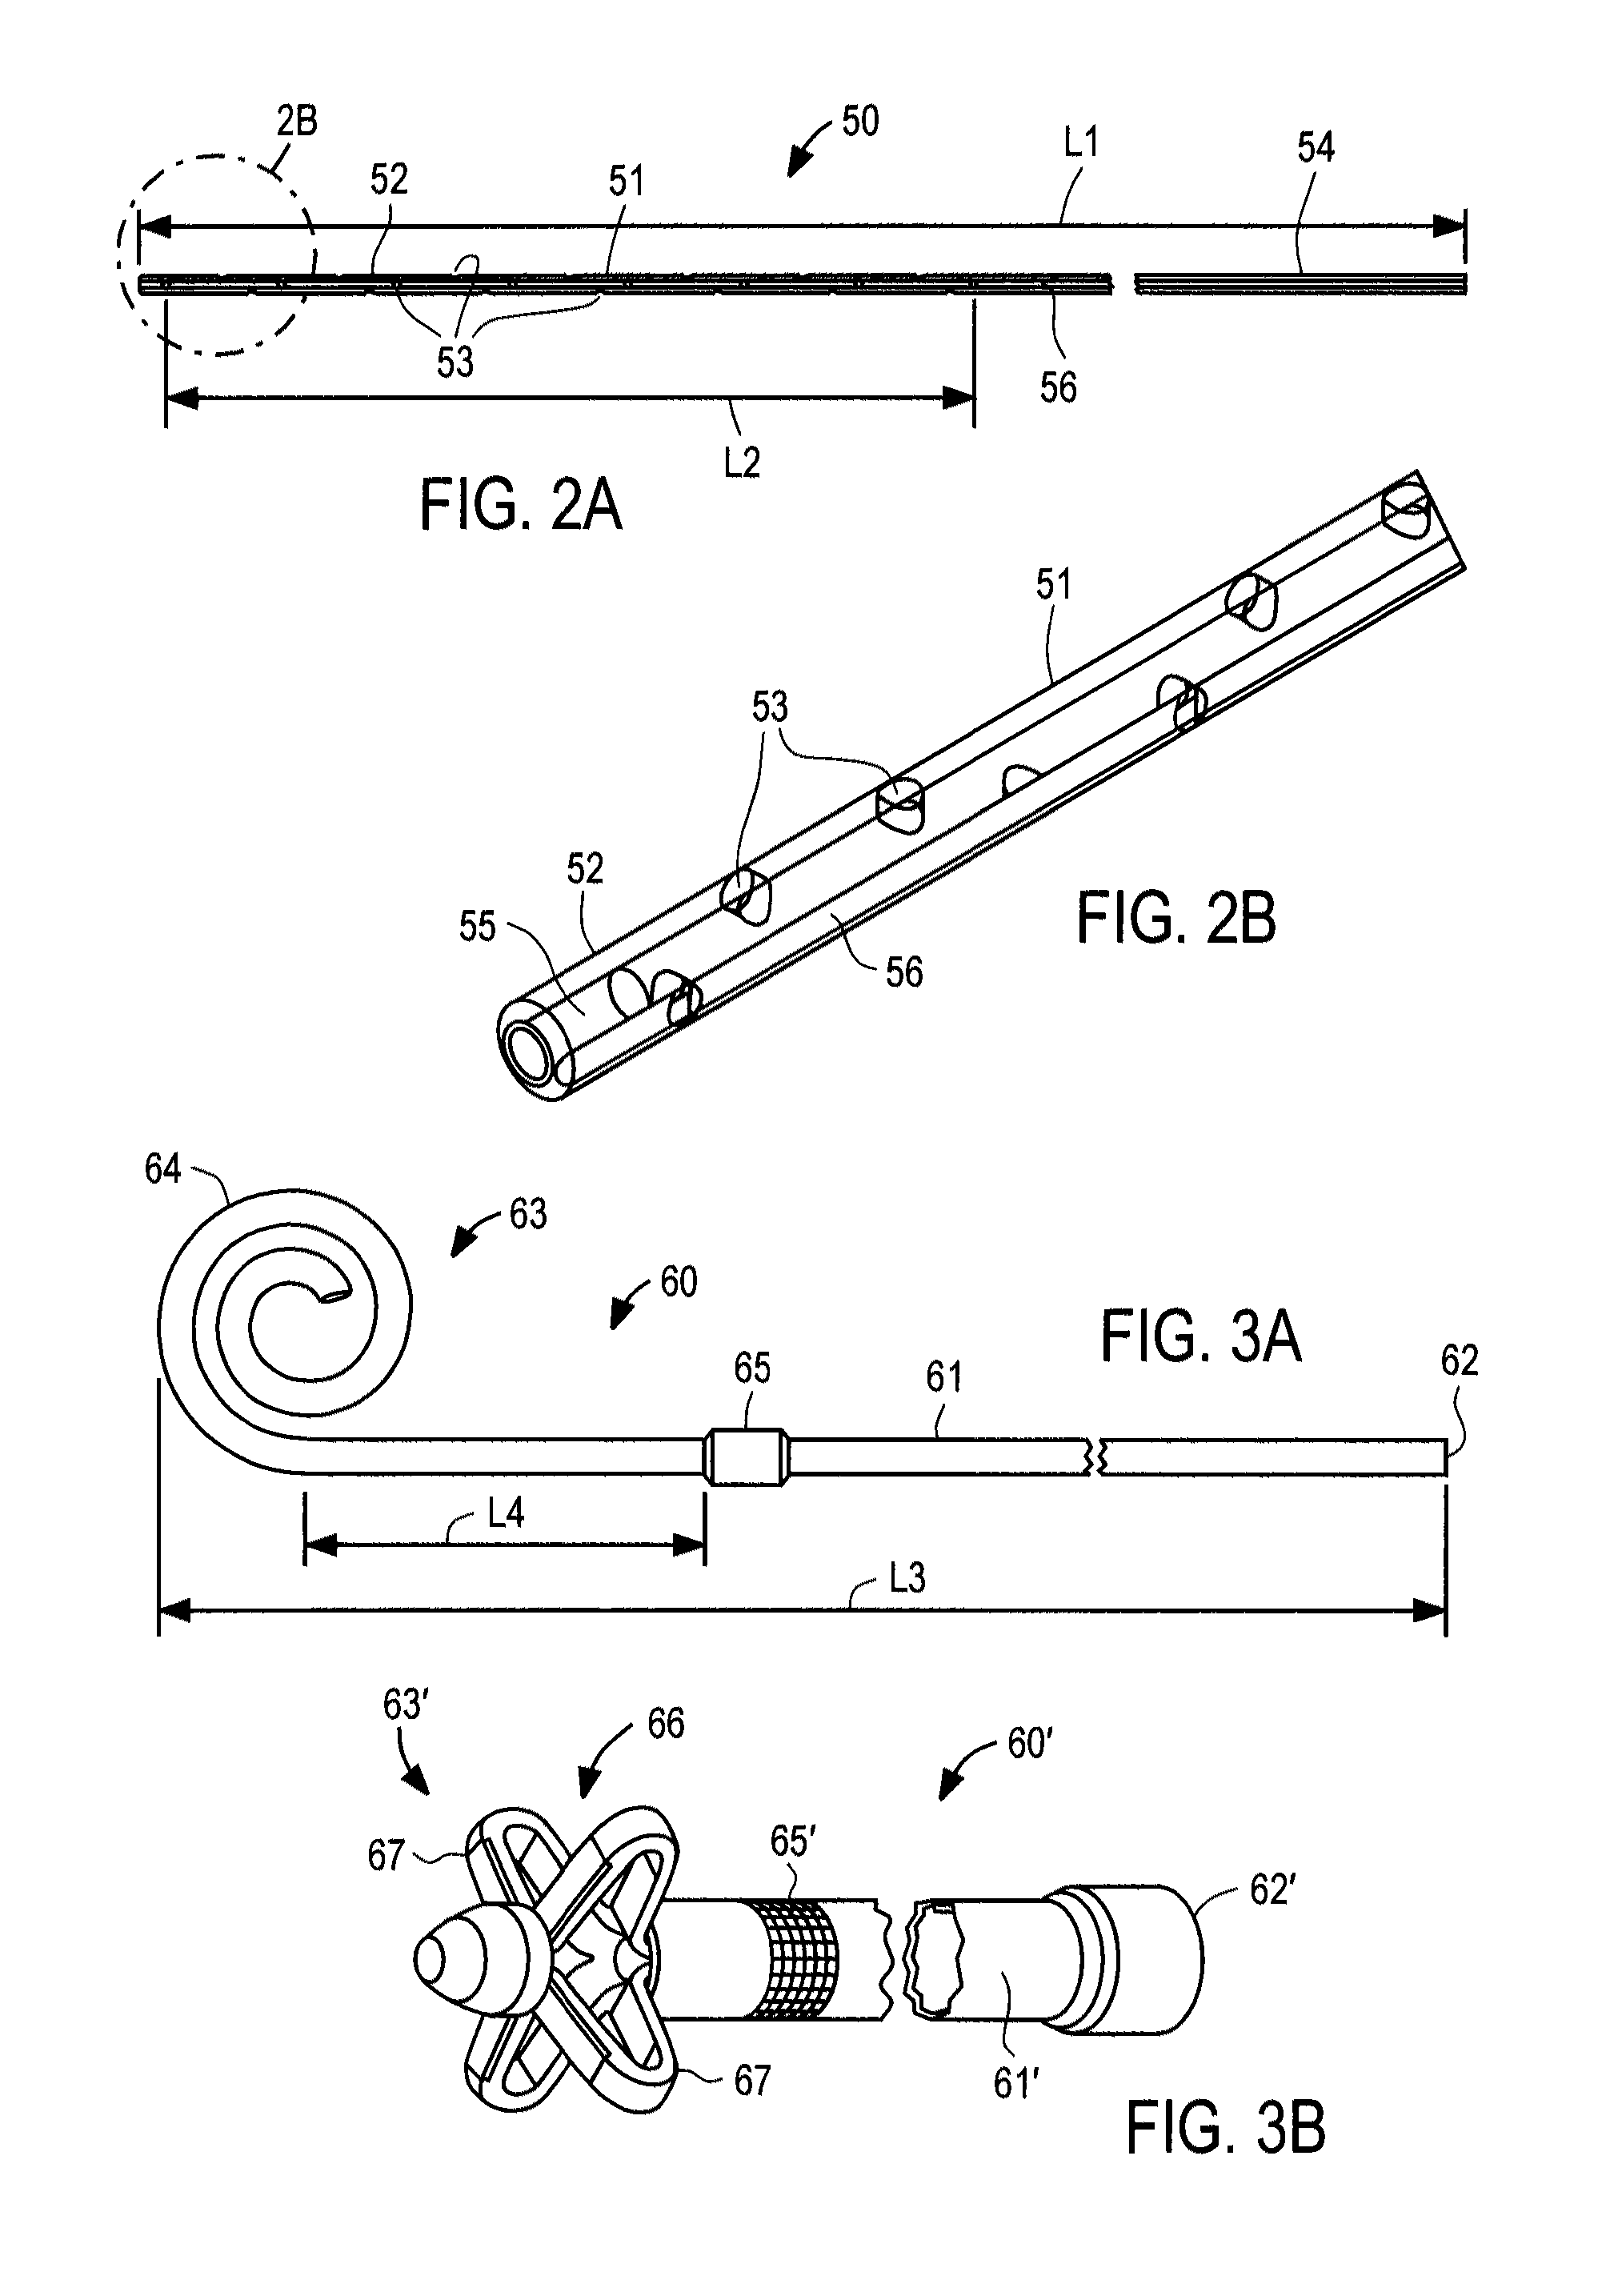 Apparatus and methods for treating intracorporeal fluid accumulation